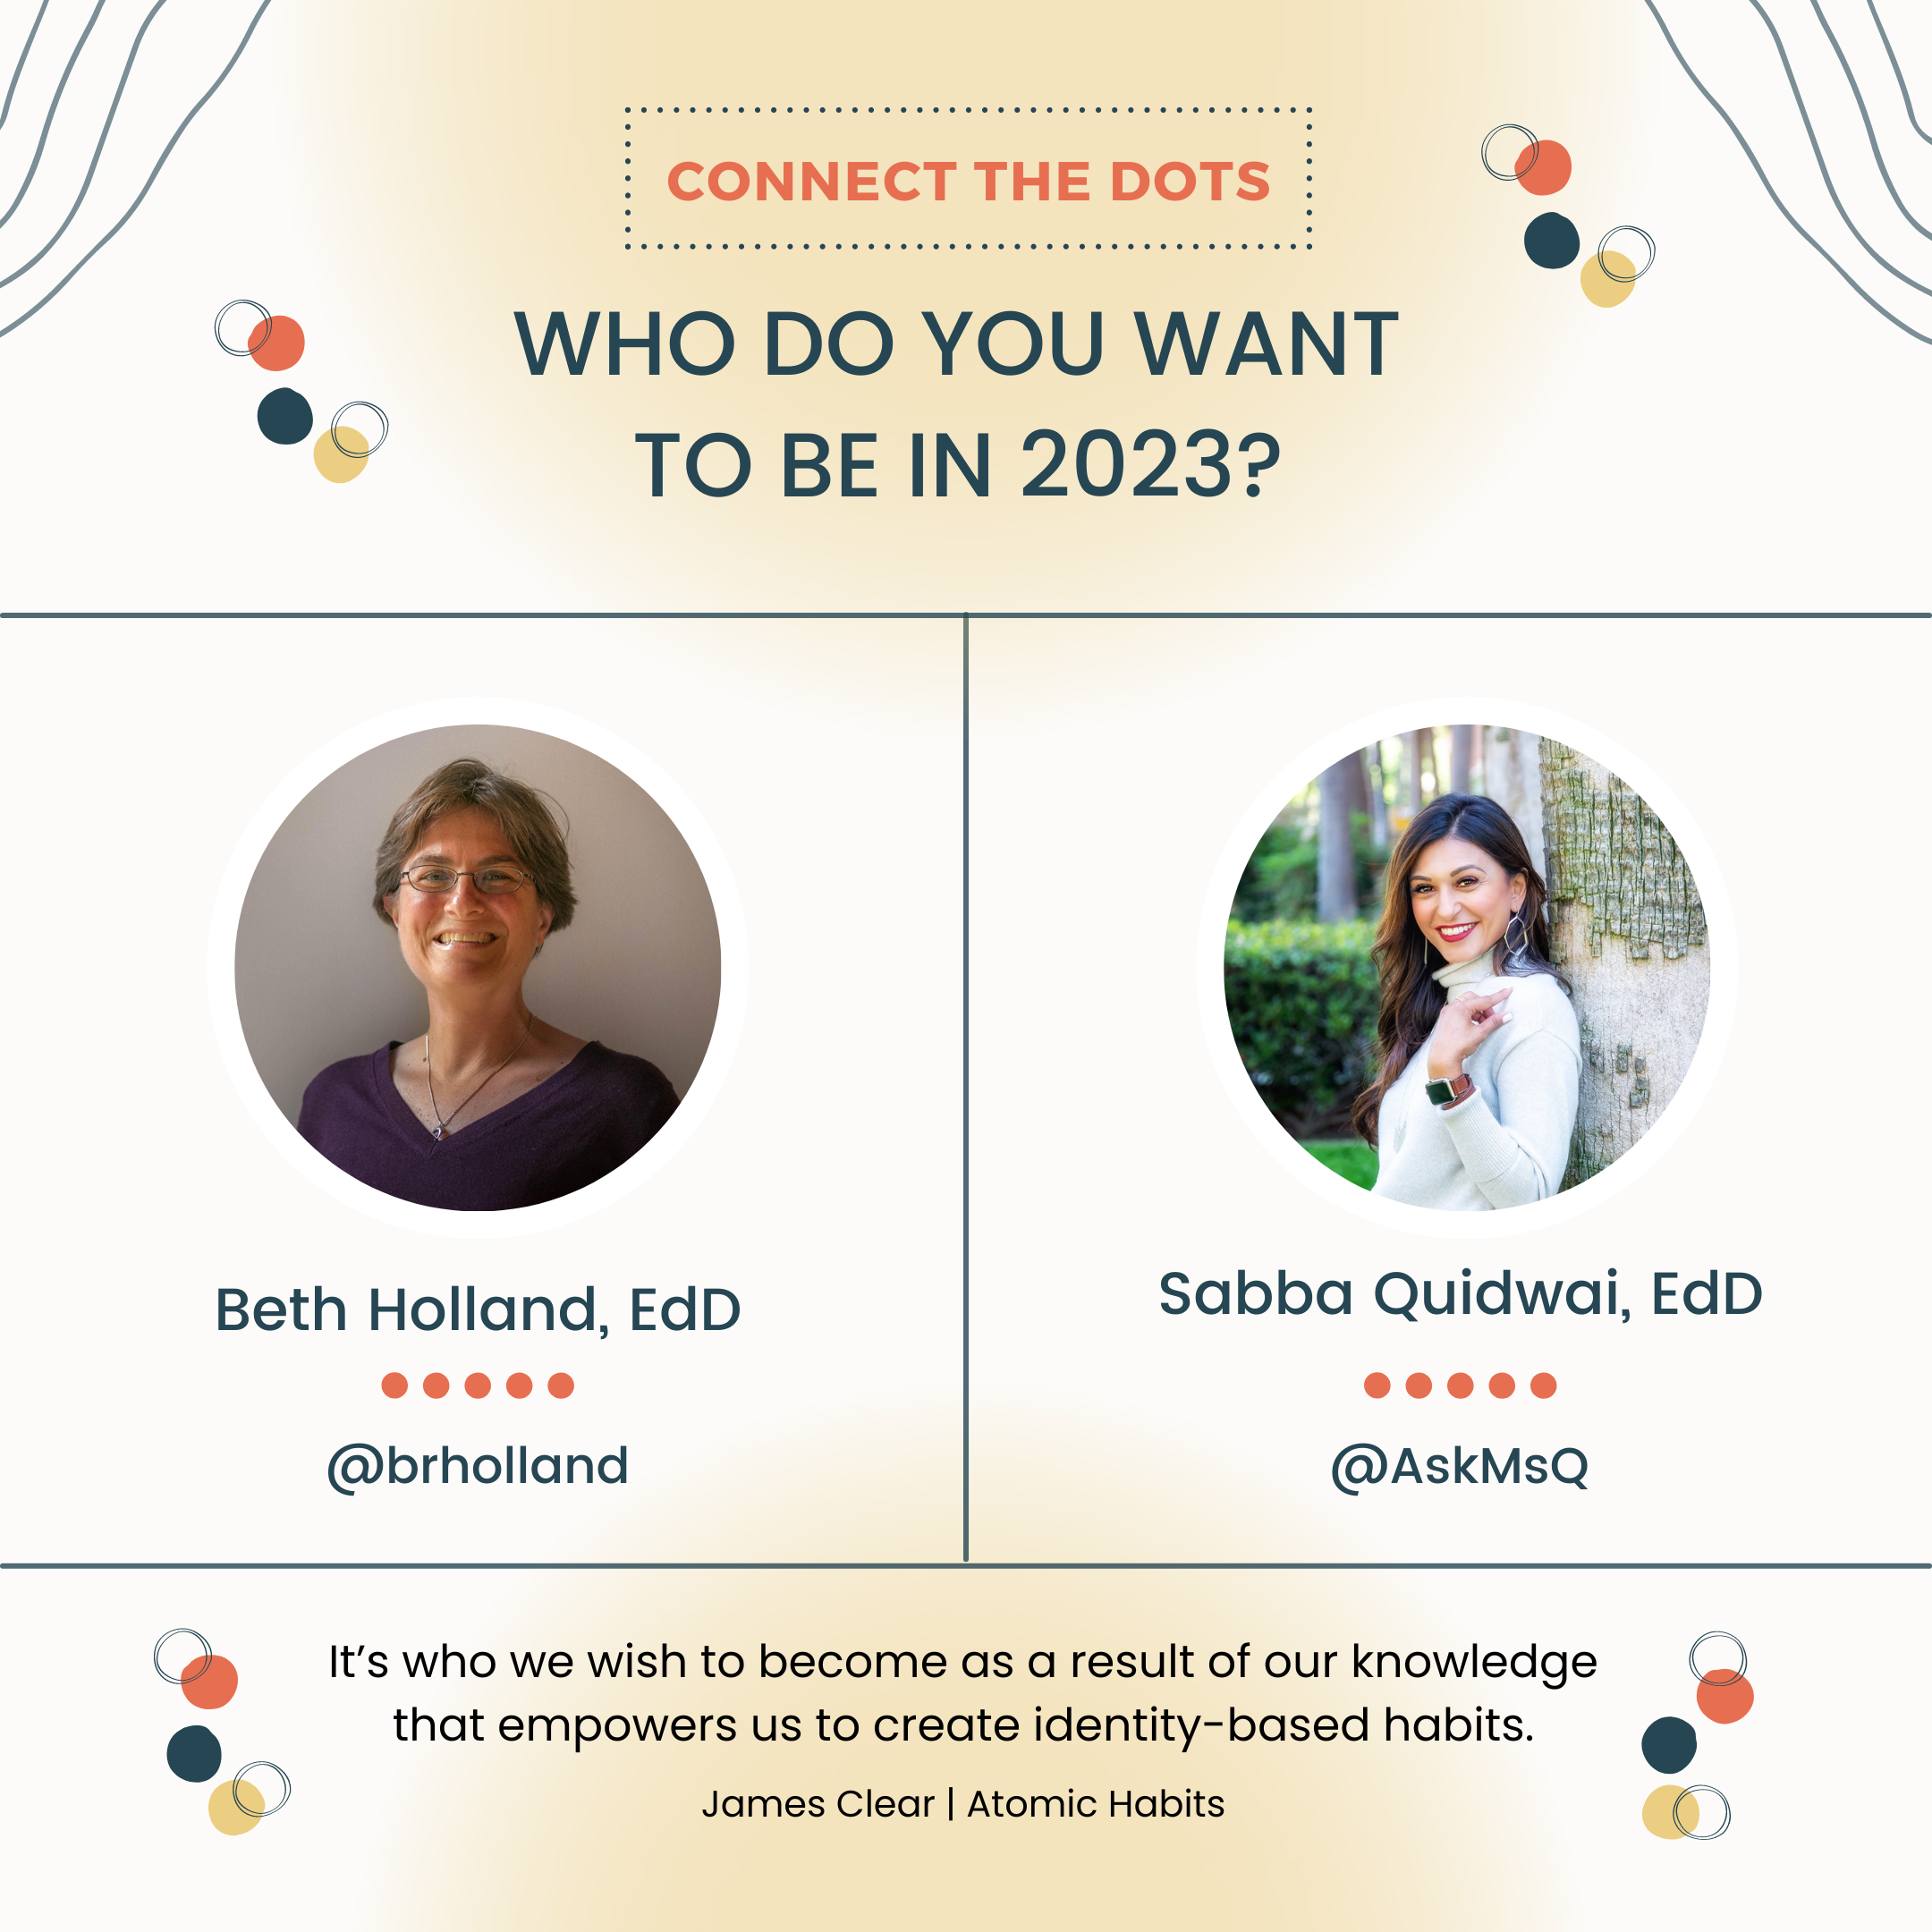 Beth Holland and Sabba Quidwai Connect the Dots: Who Do You Want to Be In 2023?